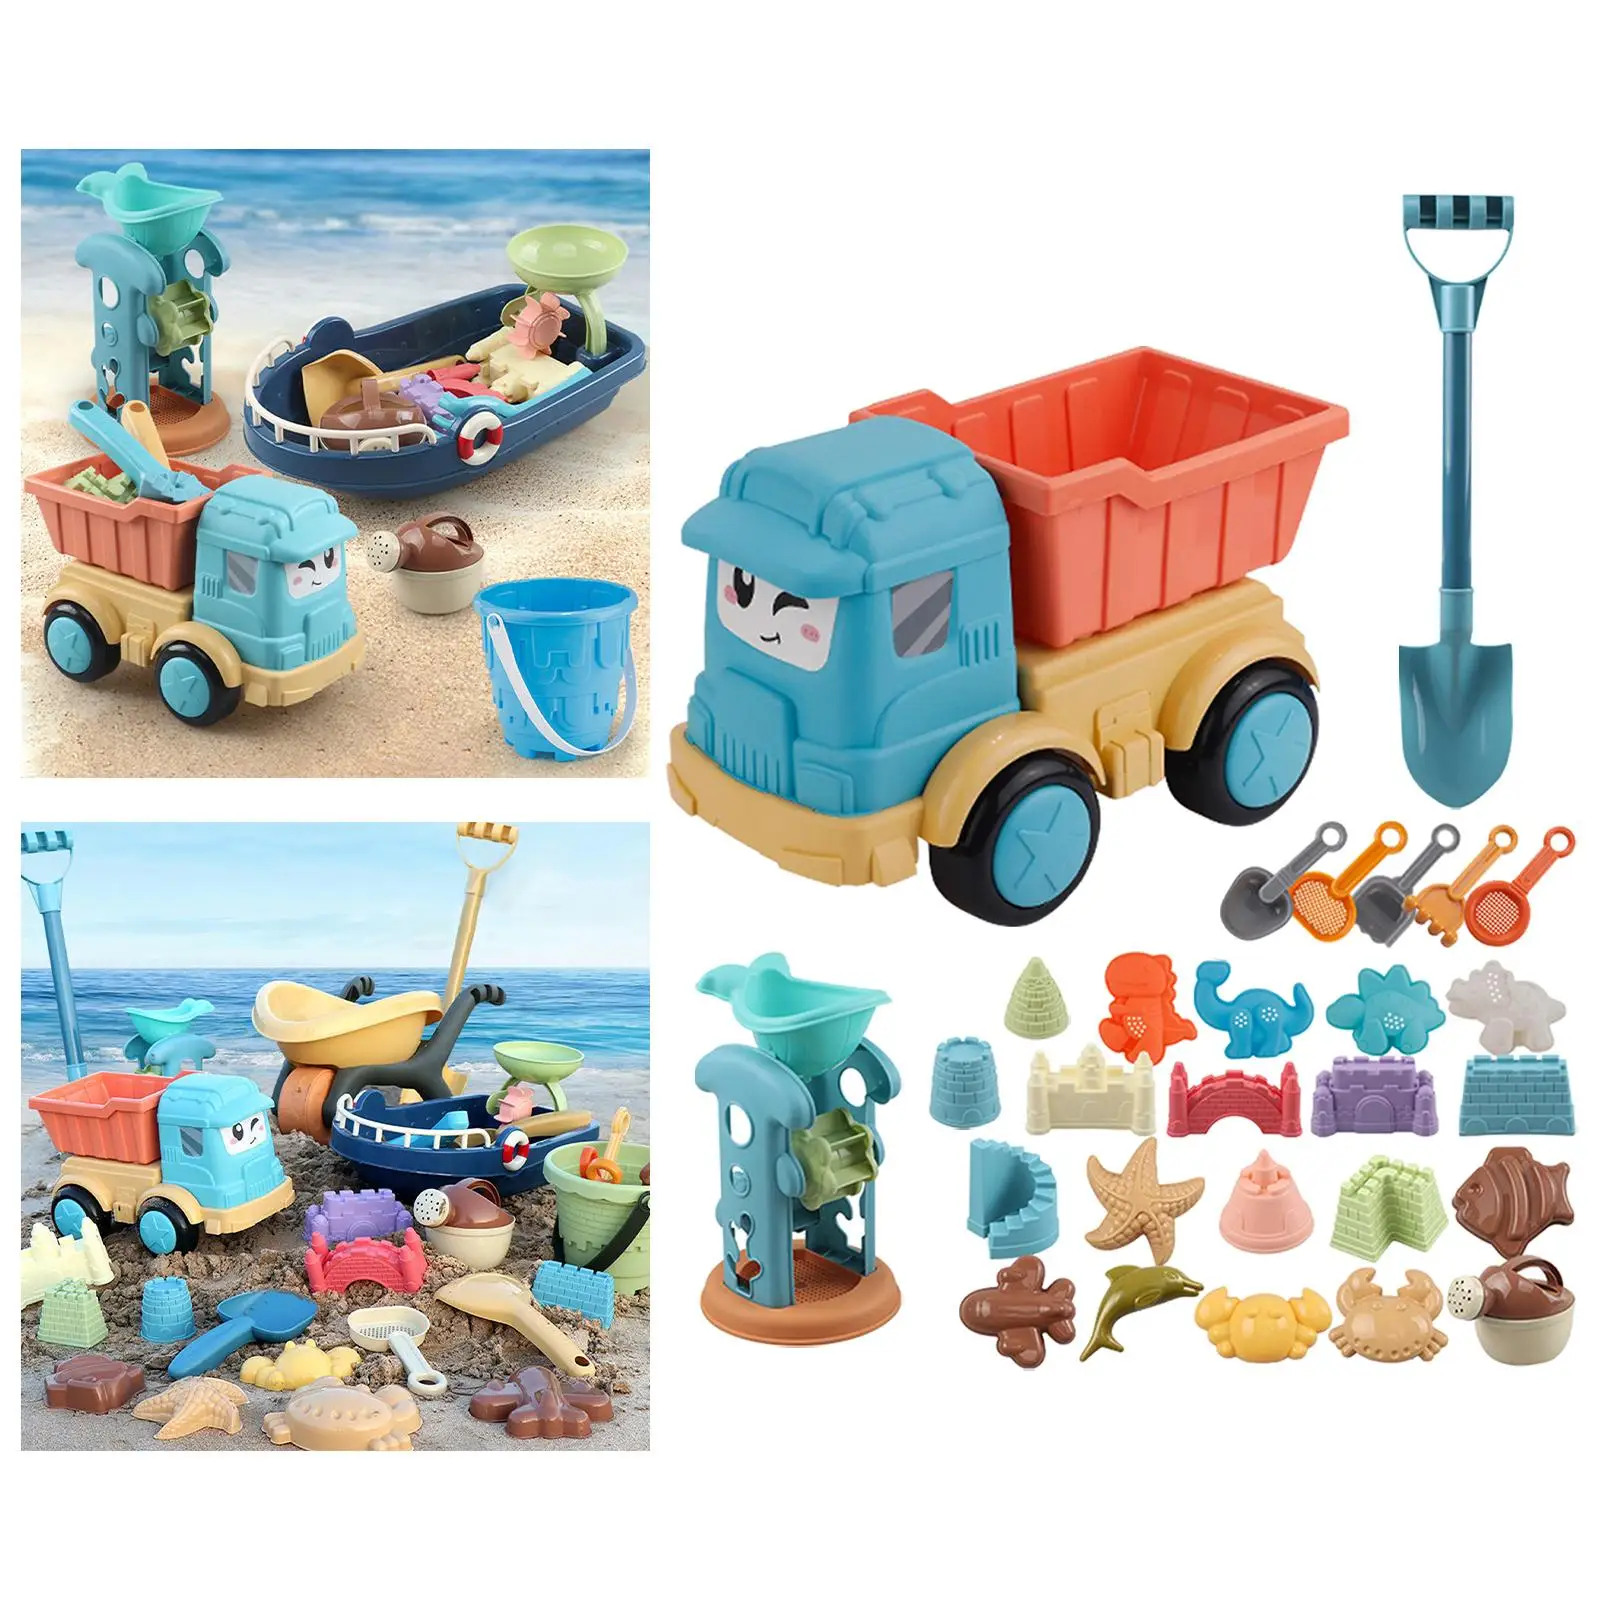 28 Pieces Sand Beach Toys Play Fun for Summer Kids Children Baby Toddler